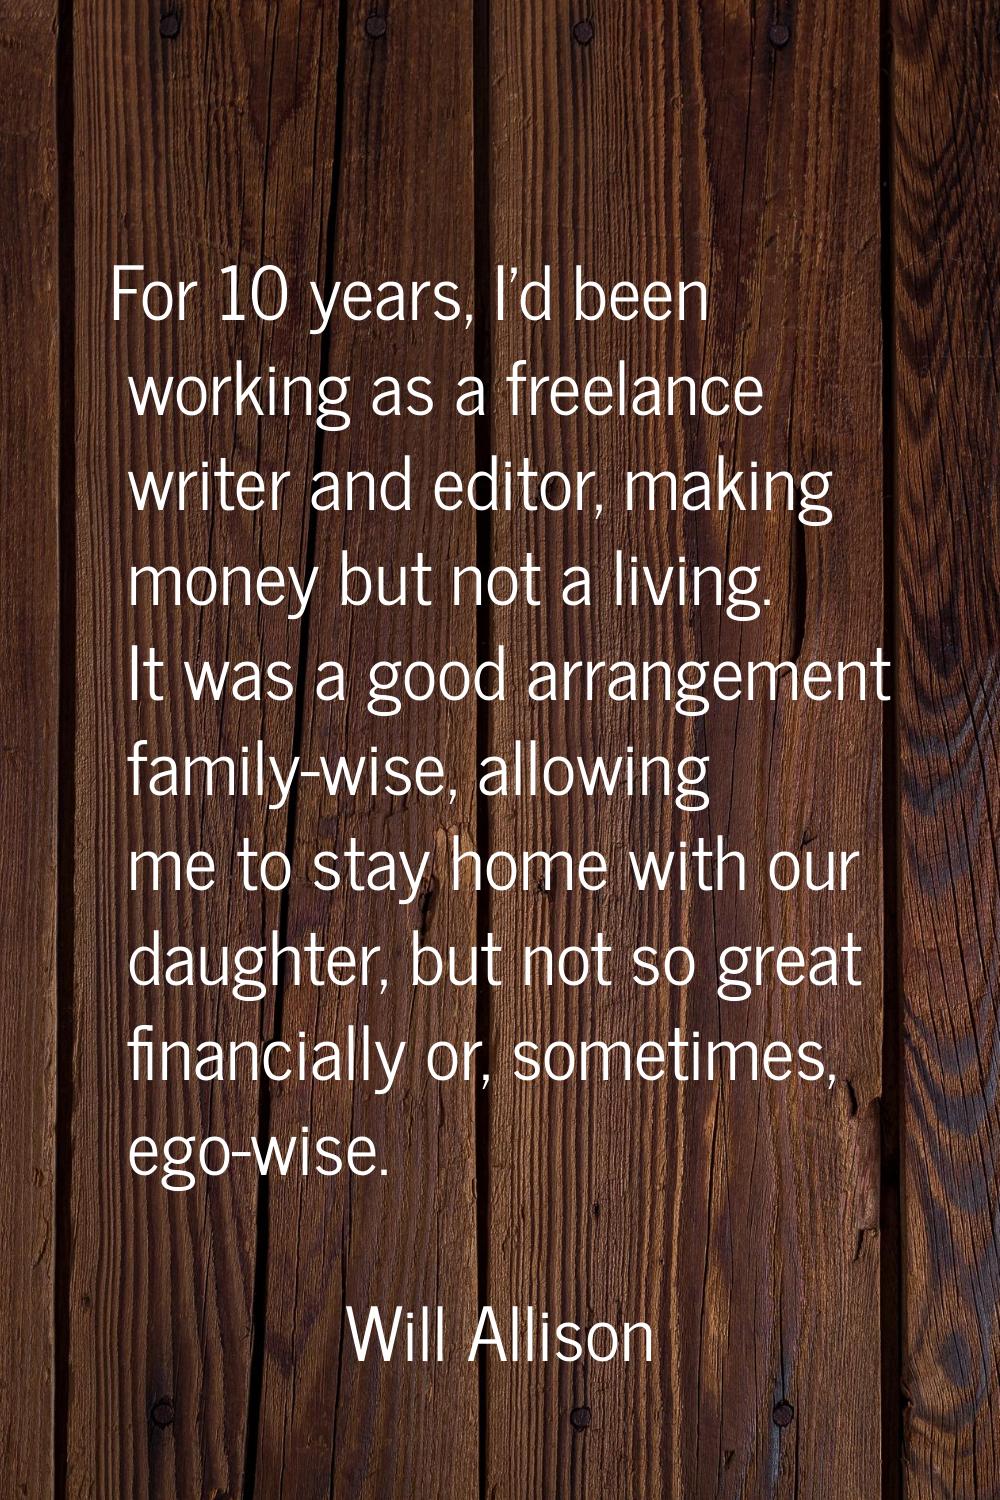 For 10 years, I'd been working as a freelance writer and editor, making money but not a living. It 